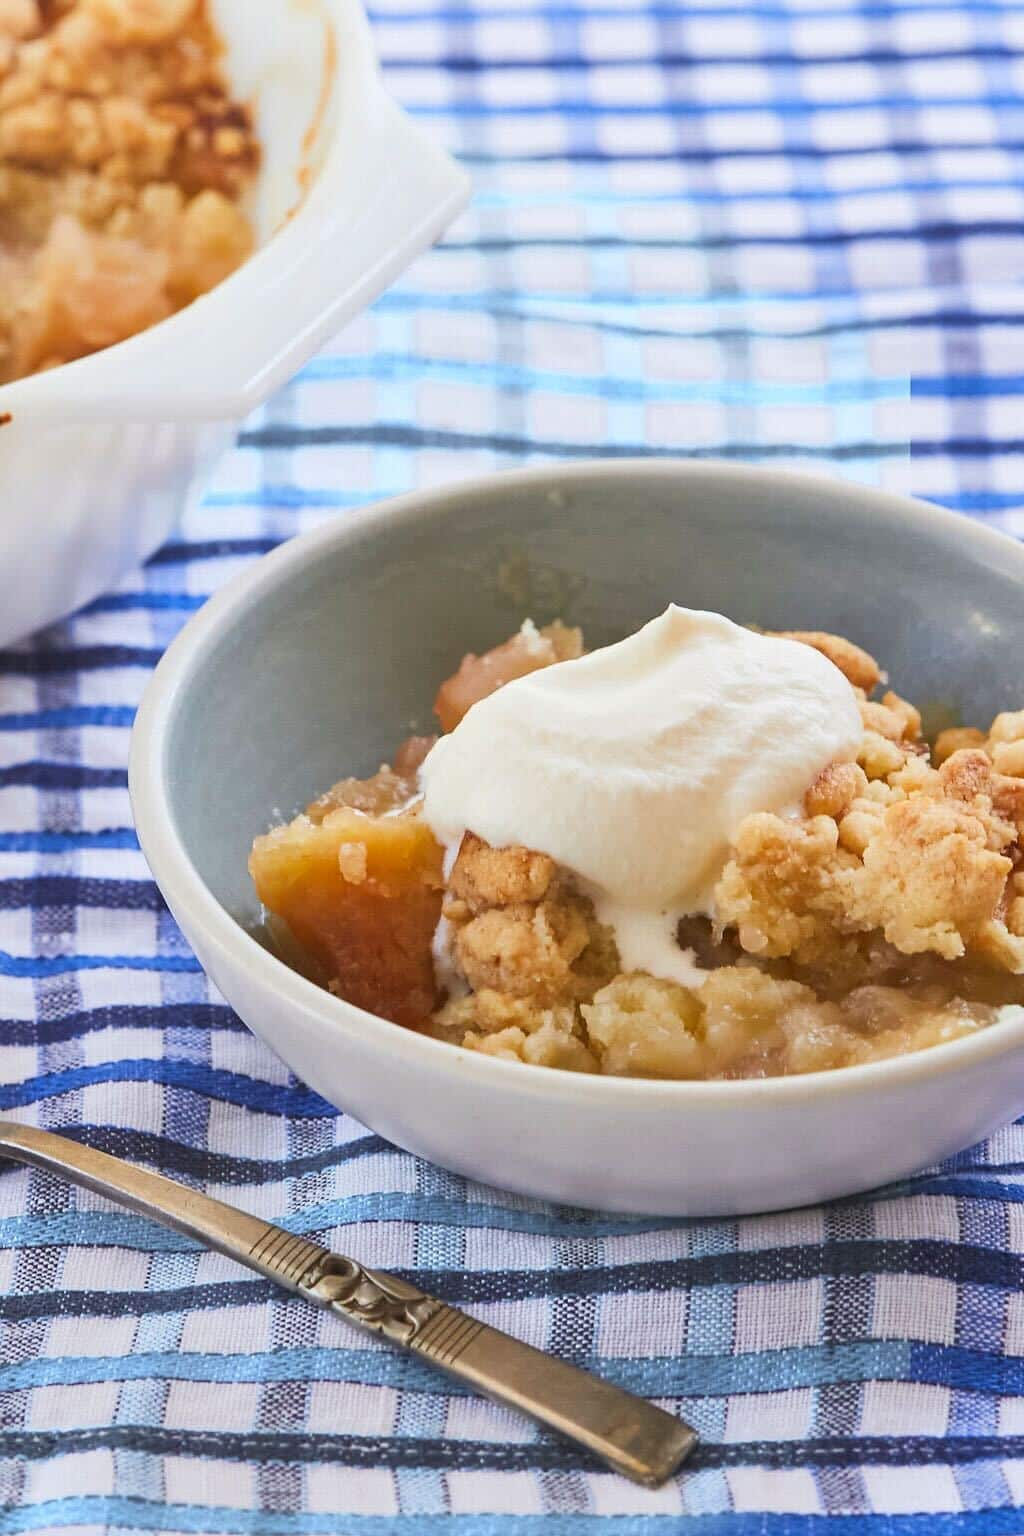 Authentic Irish Apple crumble is served in a bowl next to the baking dish. It's loaded with soft sweet apples, golden crispy crumble and topped with freshly whipped cream.